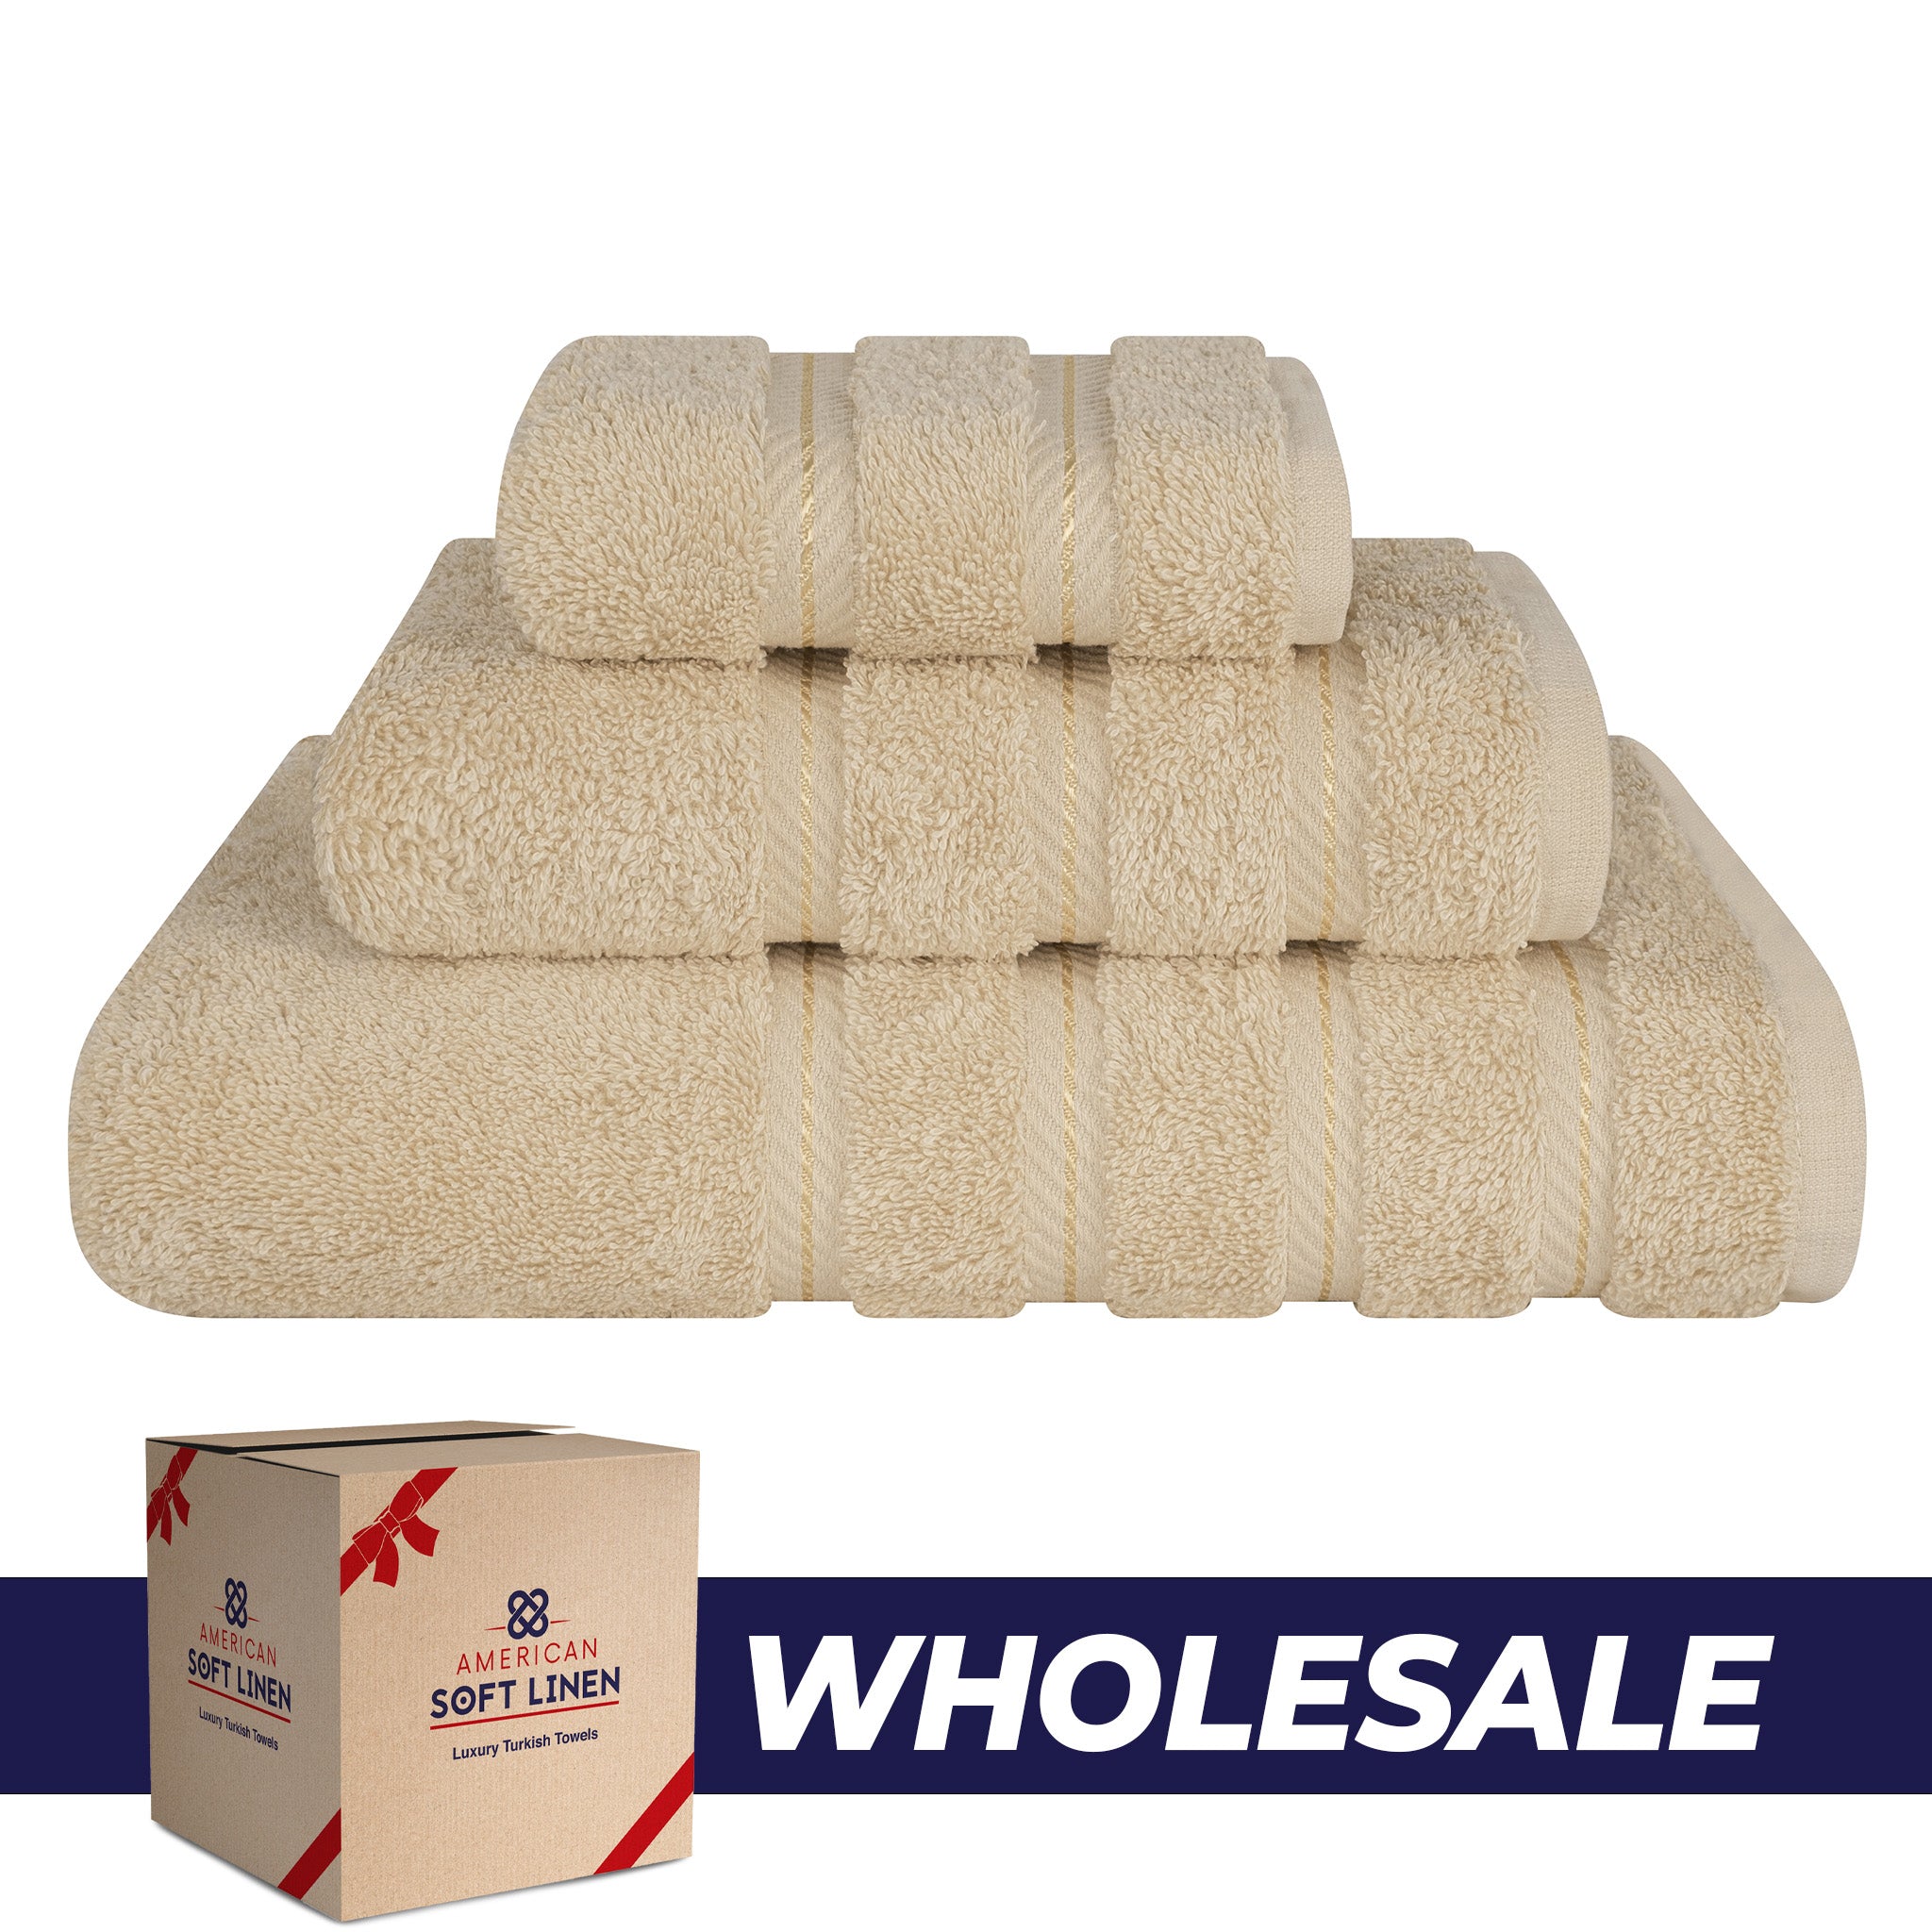 American Soft Linen 3 Piece Luxury Hotel Towel Set 20 set case pack sand-taupe-0